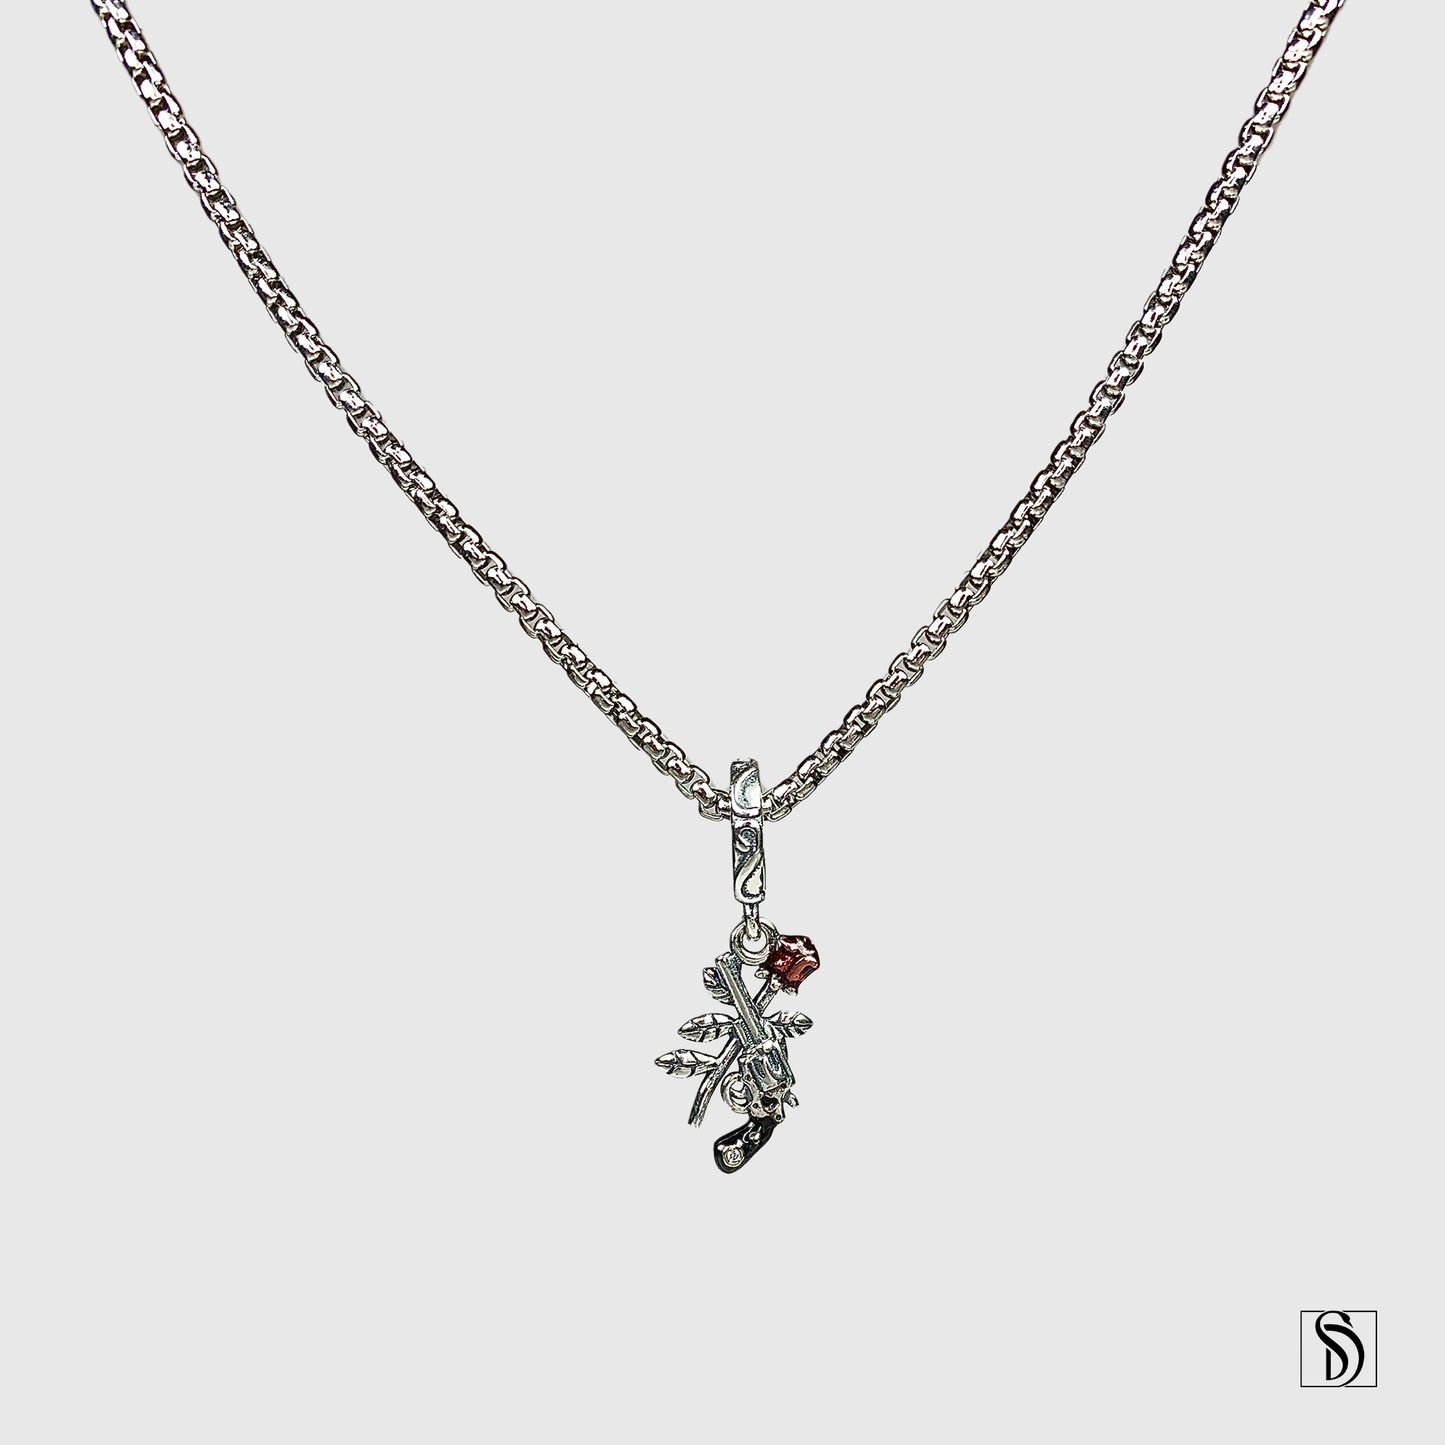 Gun and Rose Pendant Necklace